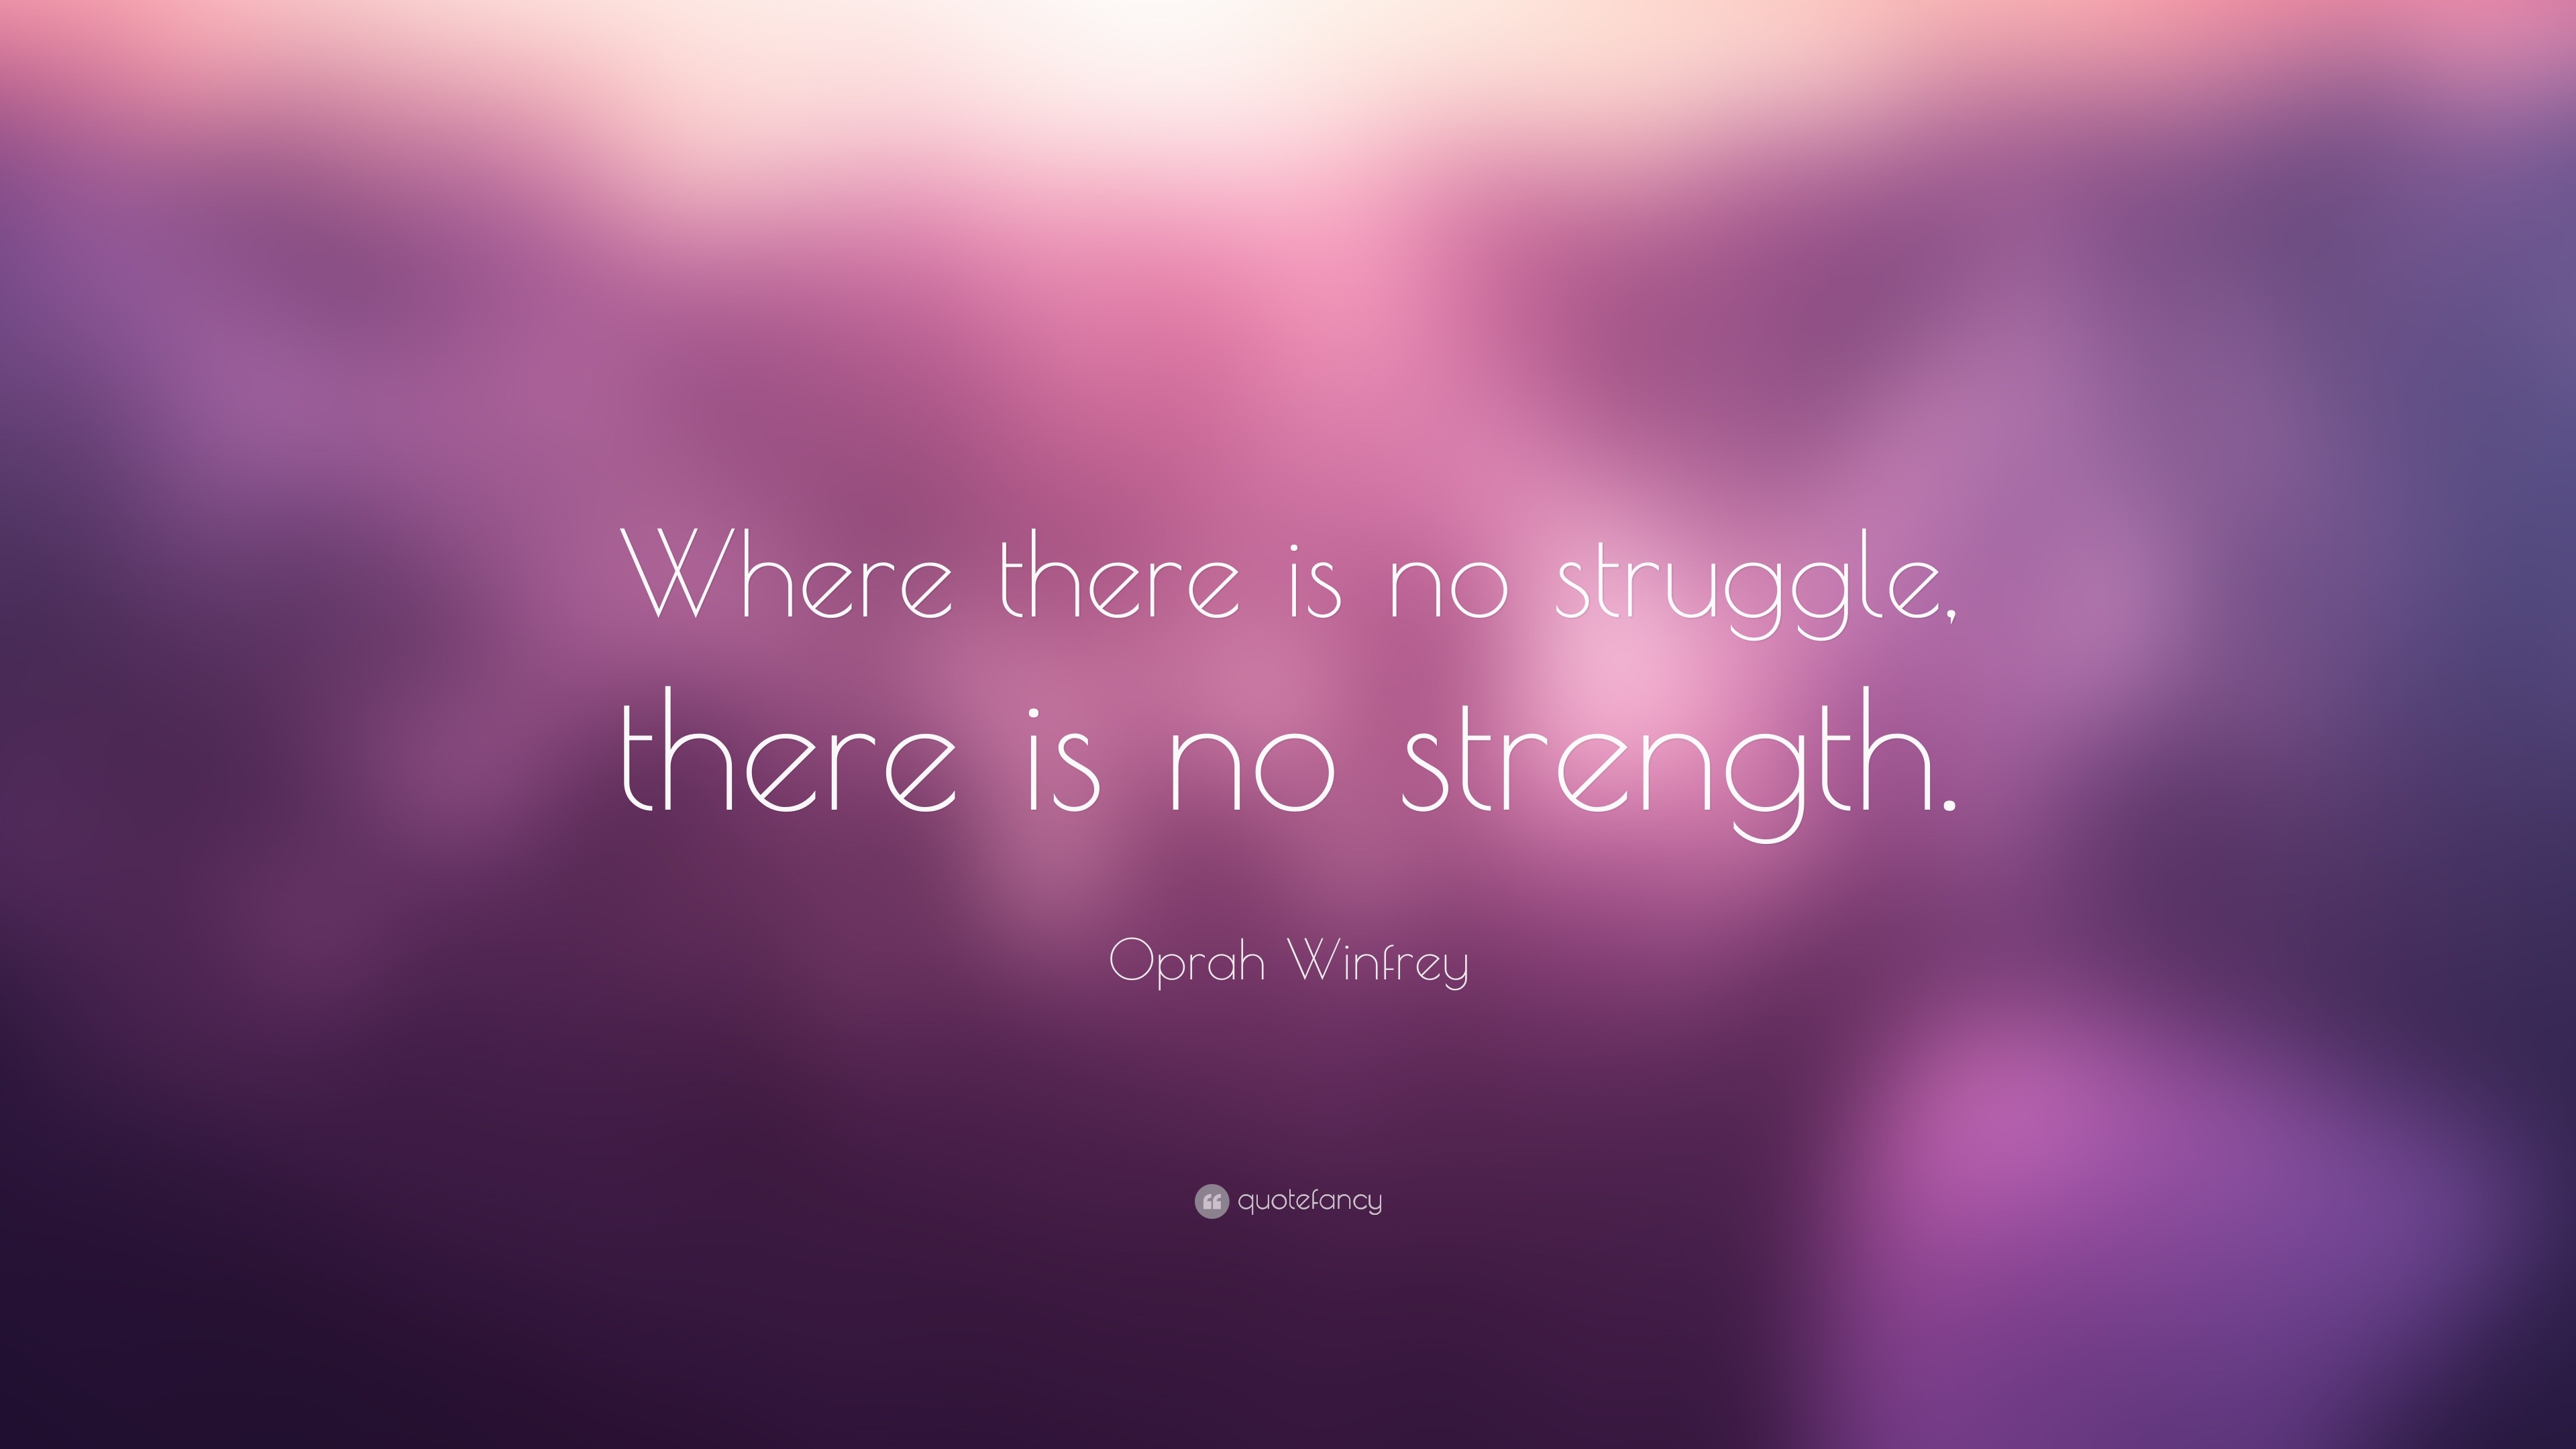 Oprah Winfrey Quote “Where there is no struggle there is no strength